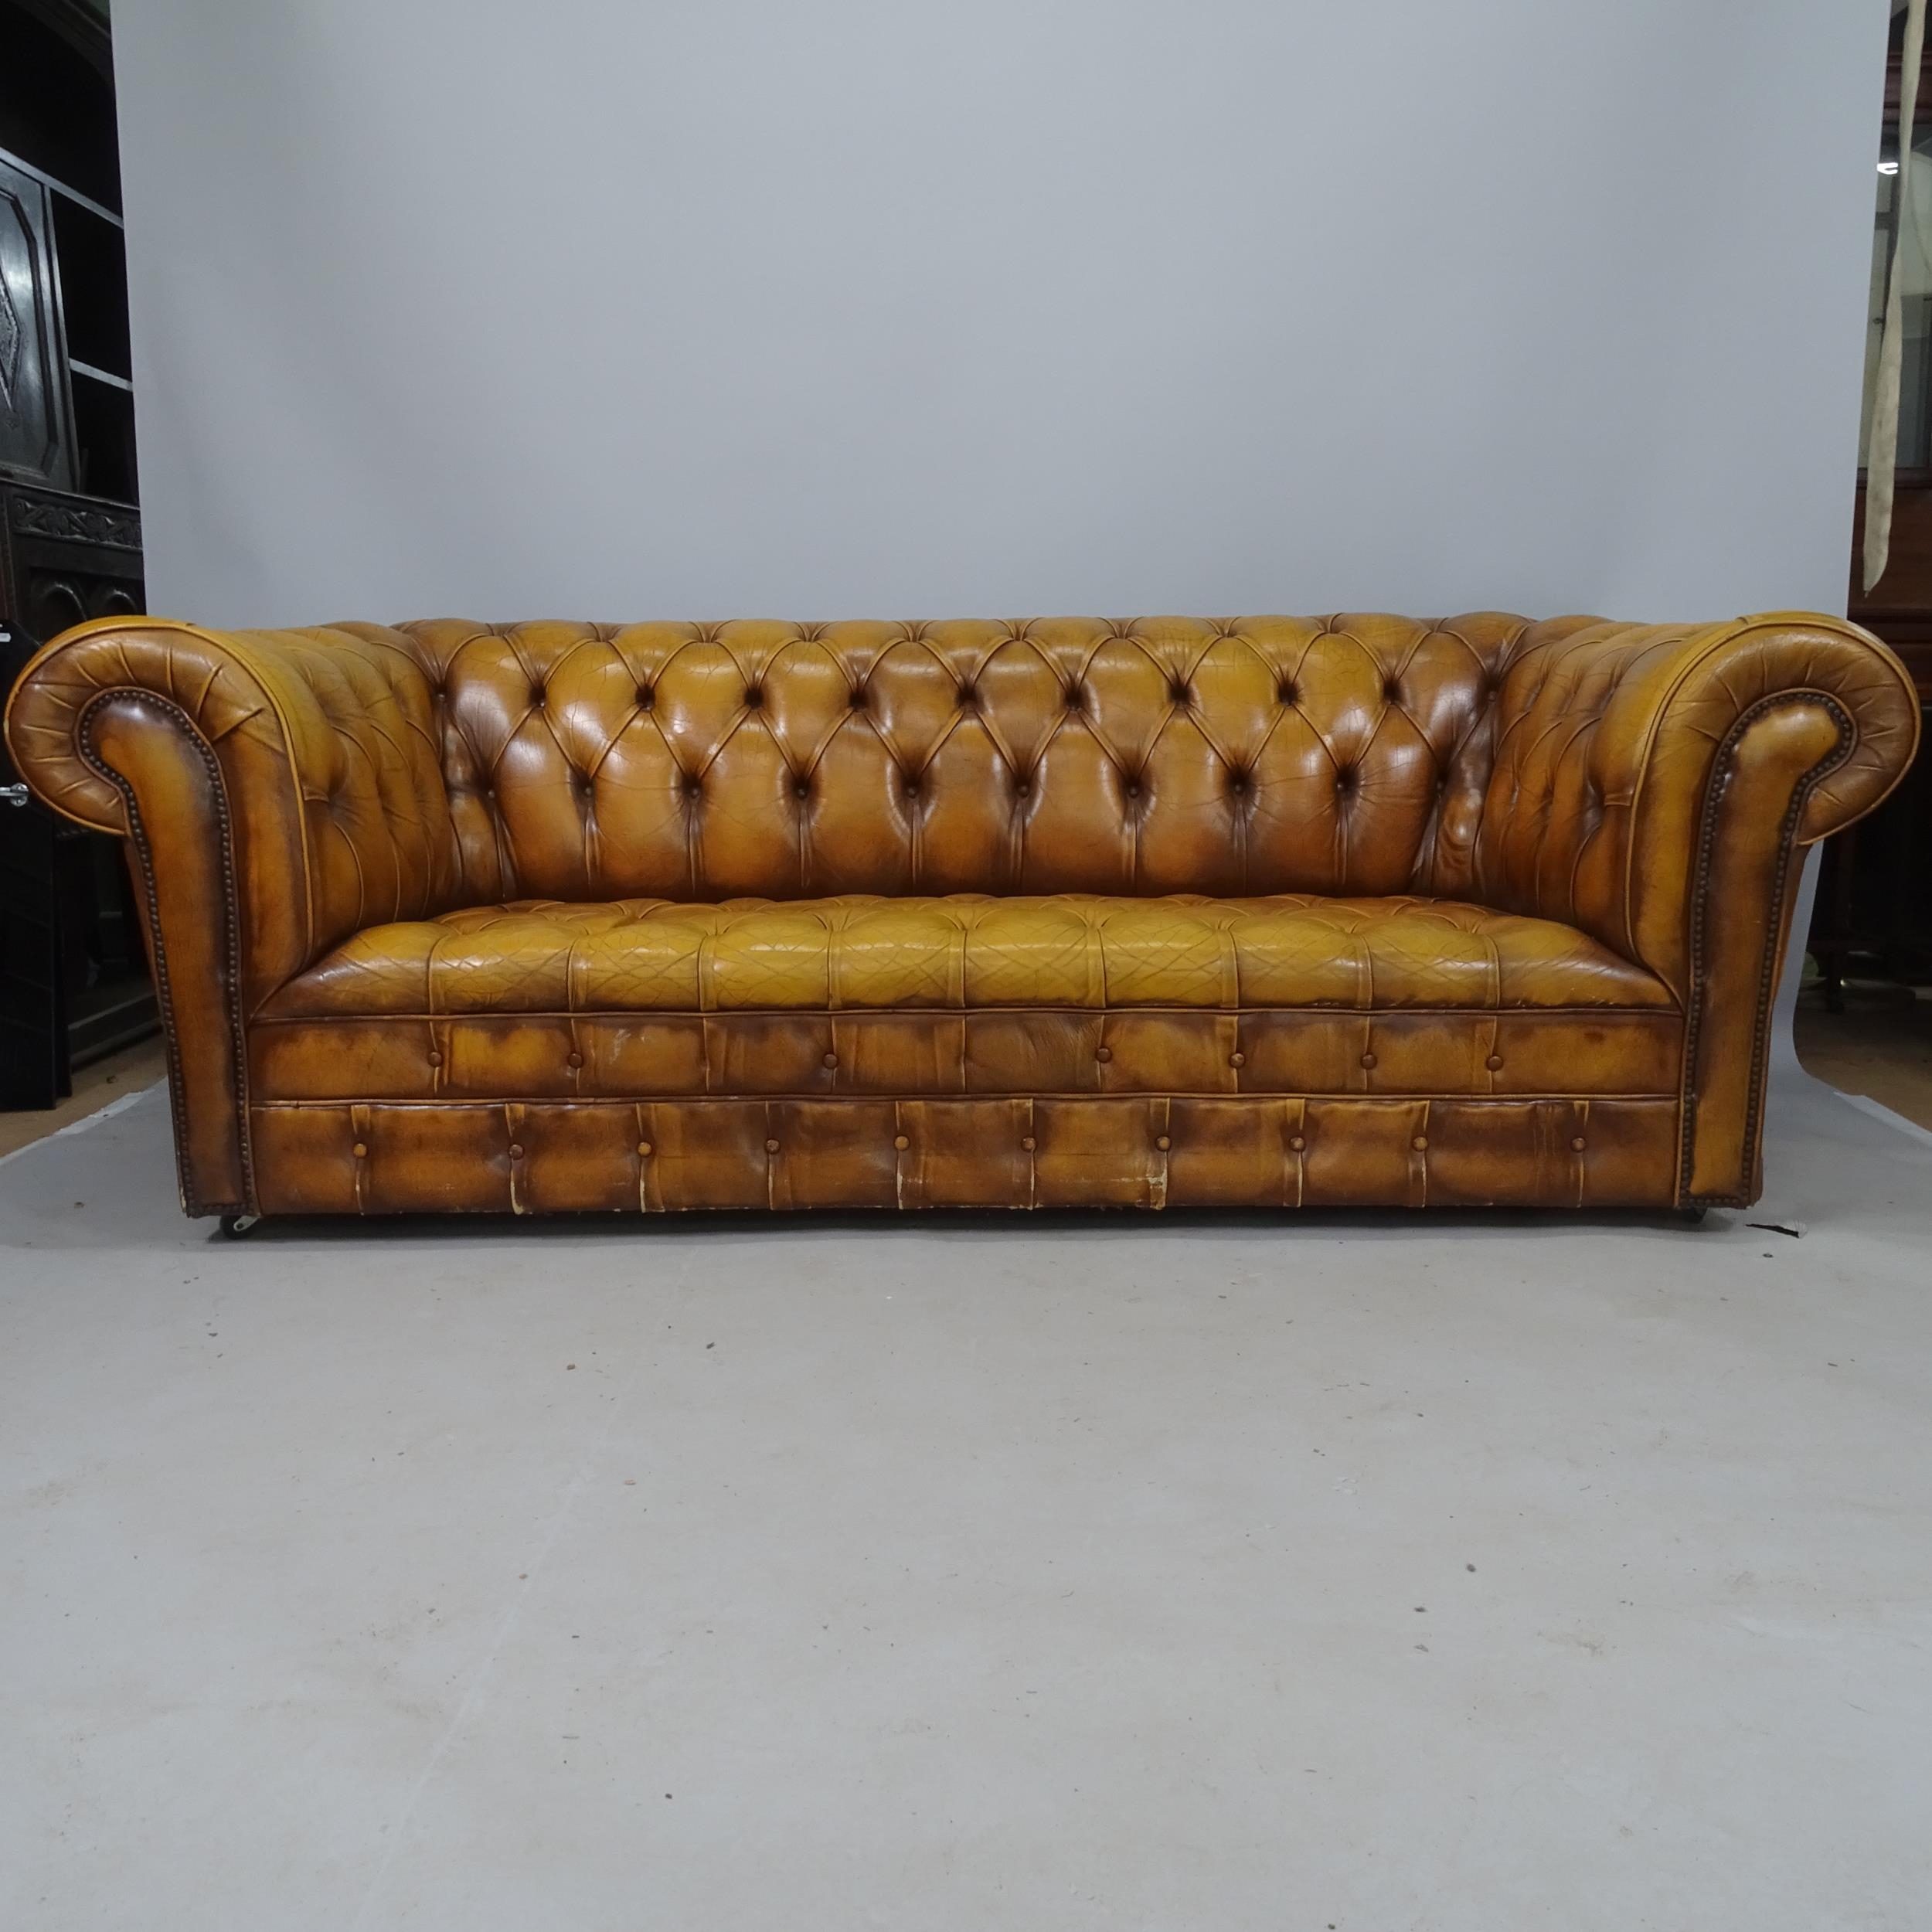 A buttoned brown leather-upholstered Chesterfield sofa, 200 x 80 x 85cm